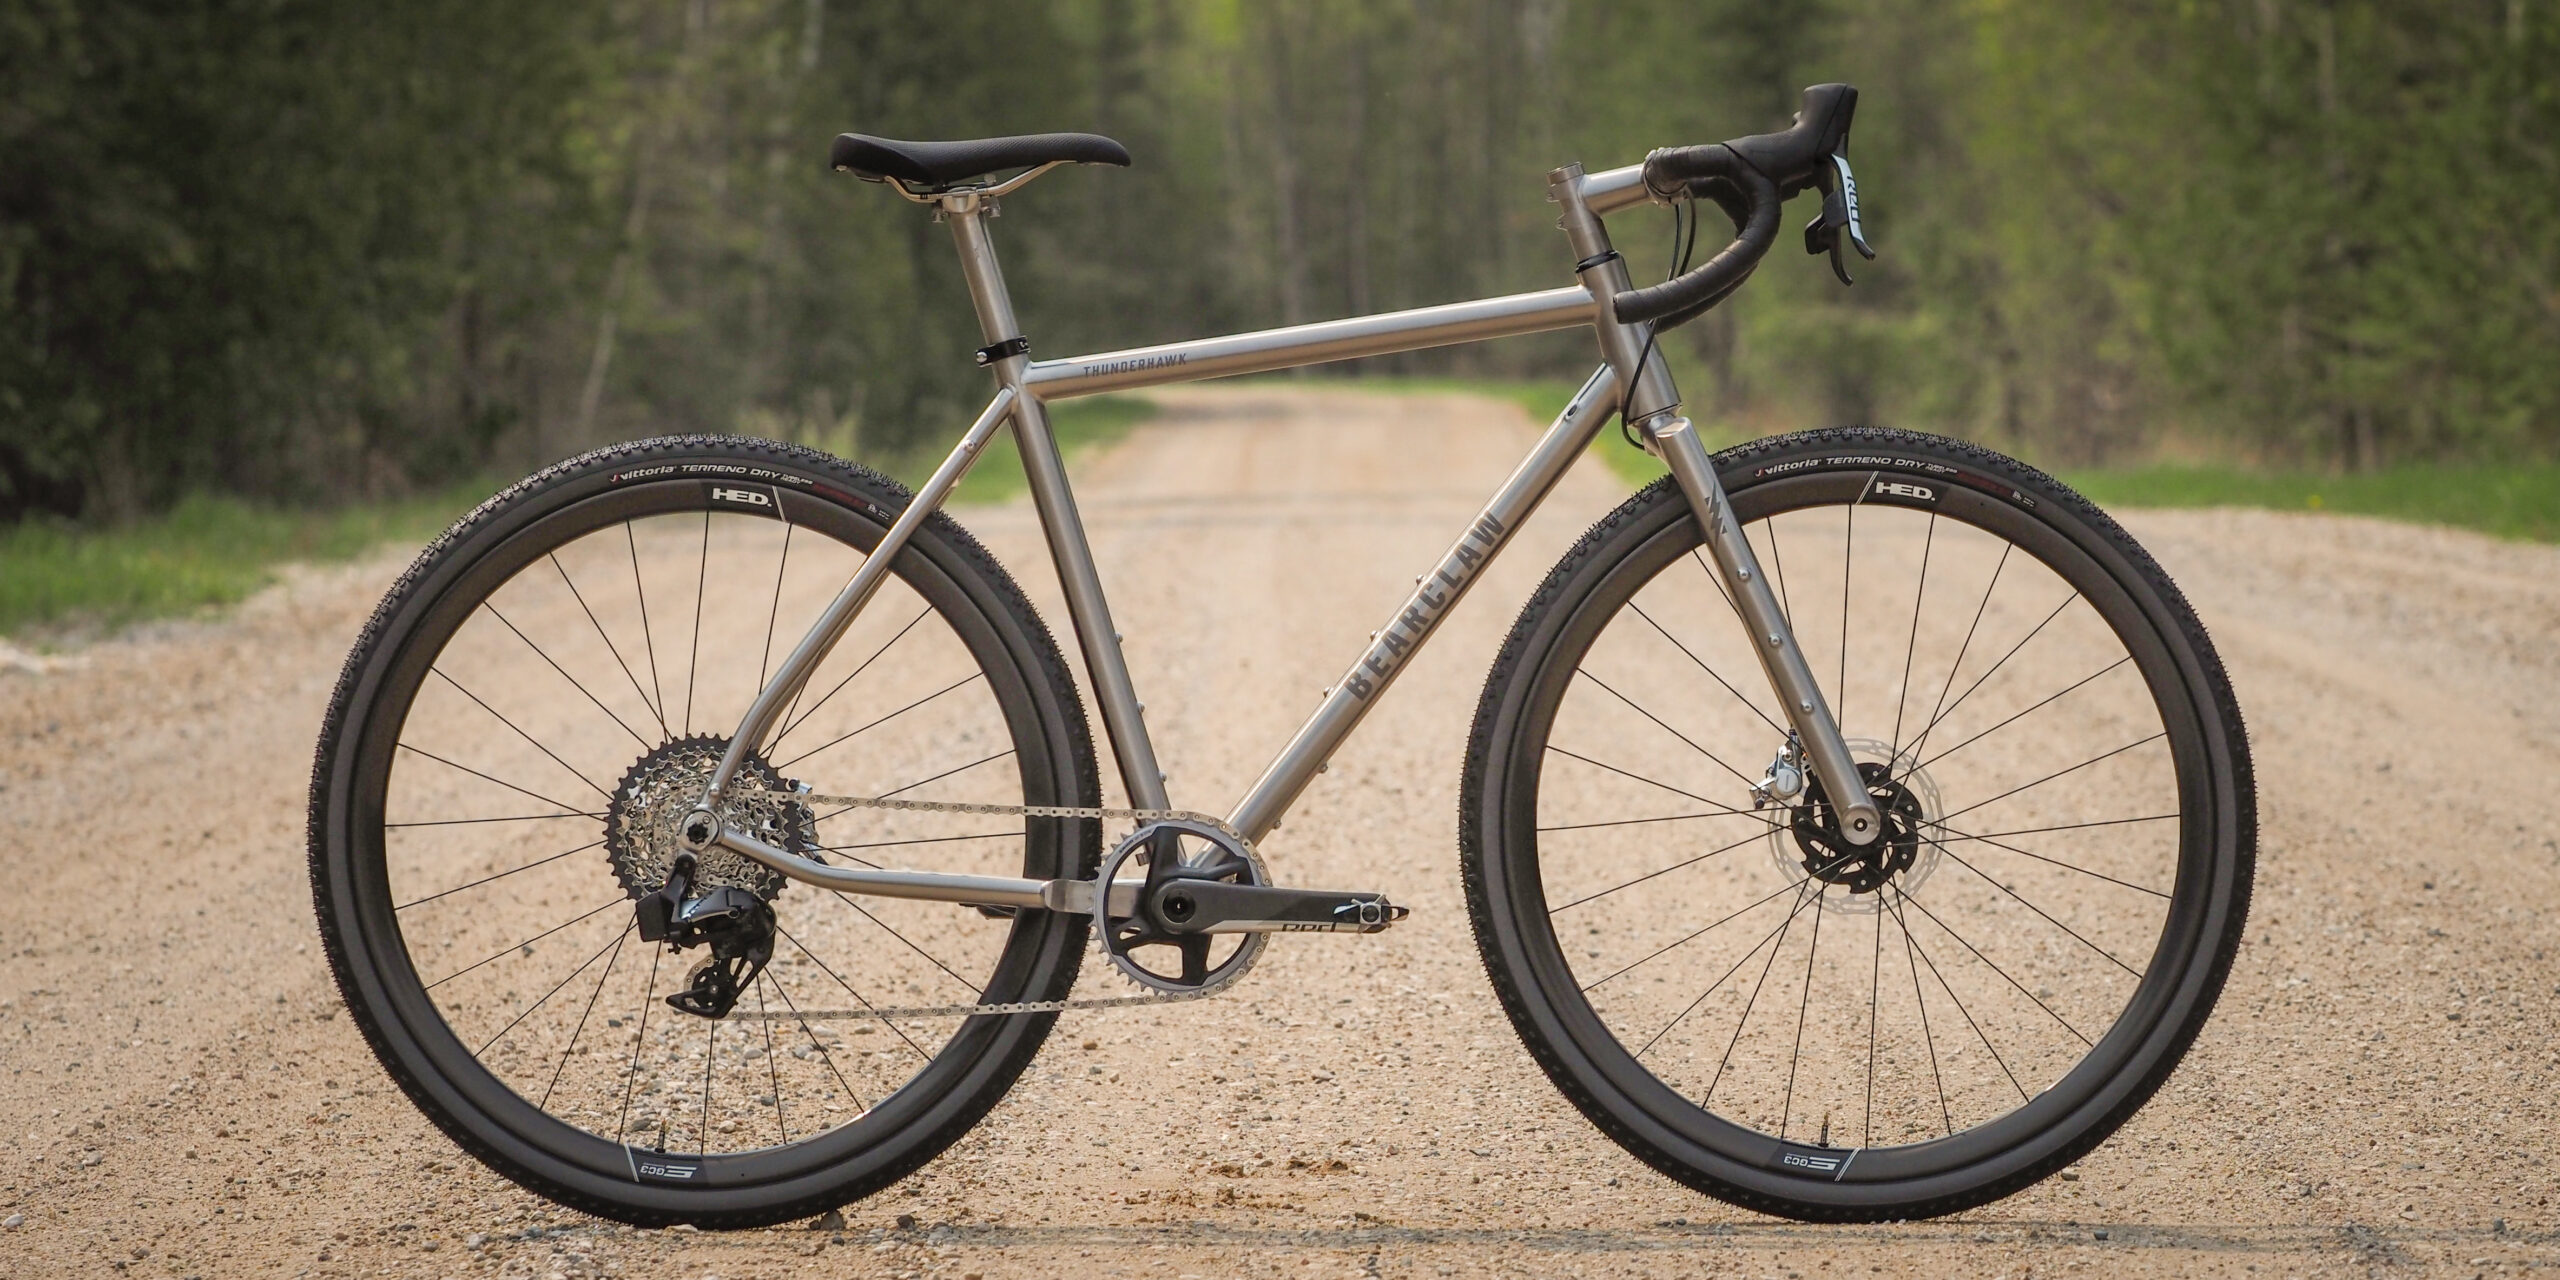 Titanium Bikes for Gravel, MTB, All-Road | Bearclaw Bicycle Co.